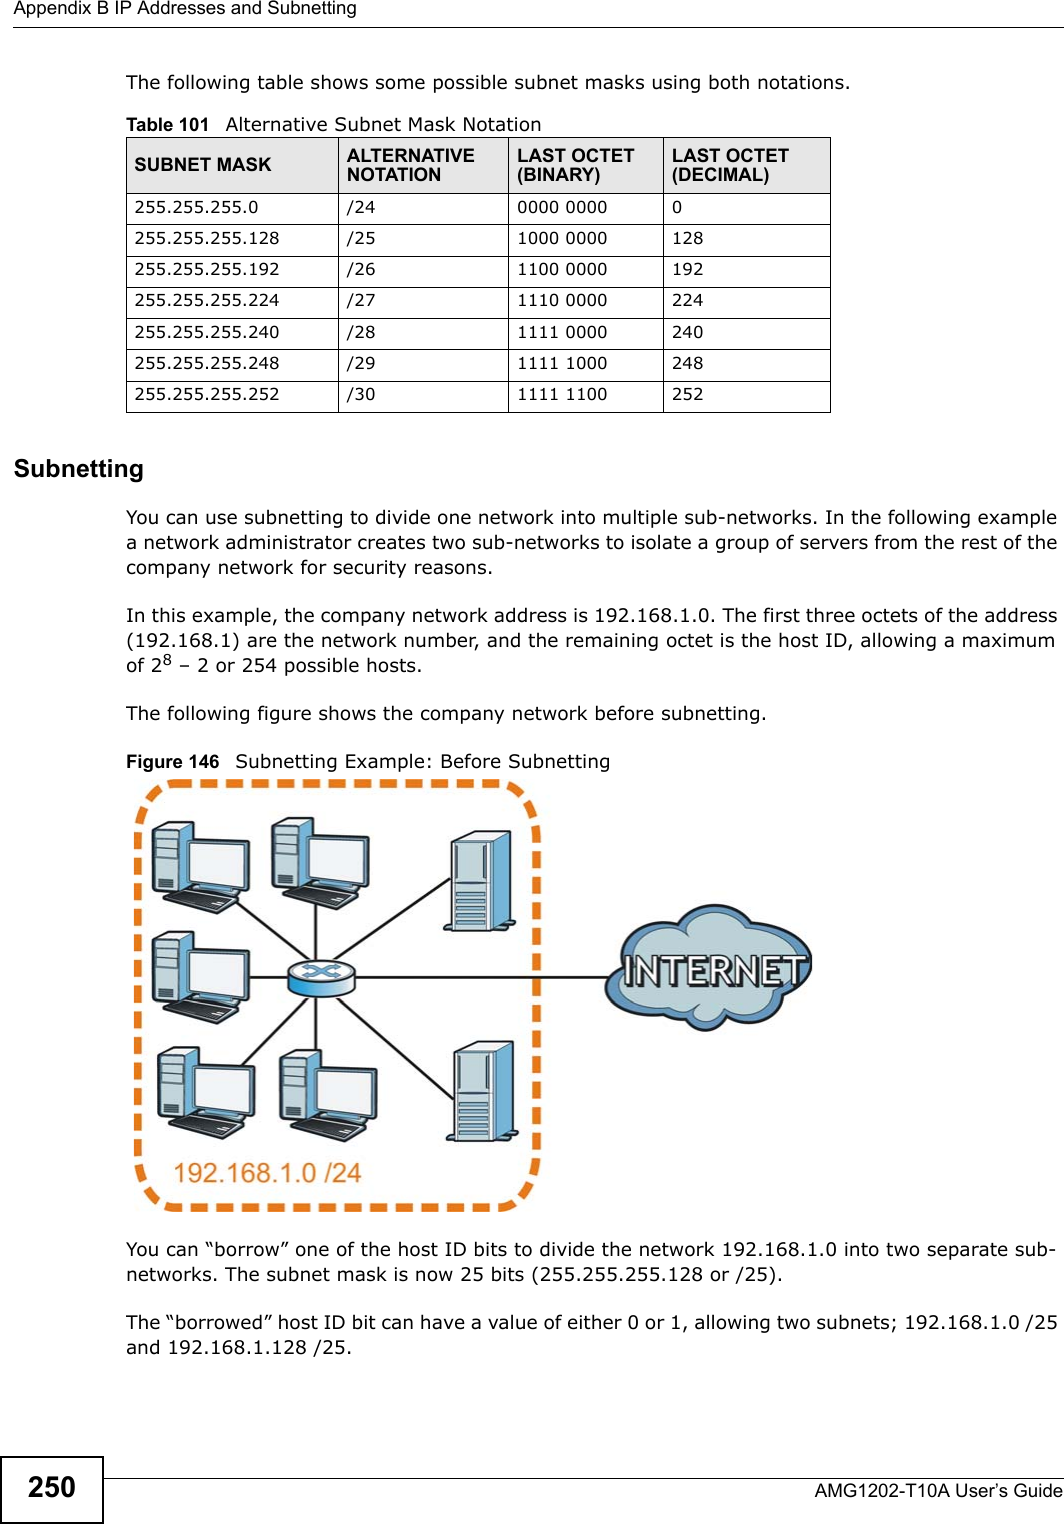 Appendix B IP Addresses and SubnettingAMG1202-T10A User’s Guide250The following table shows some possible subnet masks using both notations. SubnettingYou can use subnetting to divide one network into multiple sub-networks. In the following example a network administrator creates two sub-networks to isolate a group of servers from the rest of the company network for security reasons.In this example, the company network address is 192.168.1.0. The first three octets of the address (192.168.1) are the network number, and the remaining octet is the host ID, allowing a maximum of 28 – 2 or 254 possible hosts.The following figure shows the company network before subnetting.  Figure 146   Subnetting Example: Before SubnettingYou can “borrow” one of the host ID bits to divide the network 192.168.1.0 into two separate sub-networks. The subnet mask is now 25 bits (255.255.255.128 or /25).The “borrowed” host ID bit can have a value of either 0 or 1, allowing two subnets; 192.168.1.0 /25 and 192.168.1.128 /25. Table 101   Alternative Subnet Mask NotationSUBNET MASK ALTERNATIVE NOTATIONLAST OCTET (BINARY)LAST OCTET (DECIMAL)255.255.255.0 /24 0000 0000 0255.255.255.128 /25 1000 0000 128255.255.255.192 /26 1100 0000 192255.255.255.224 /27 1110 0000 224255.255.255.240 /28 1111 0000 240255.255.255.248 /29 1111 1000 248255.255.255.252 /30 1111 1100 252